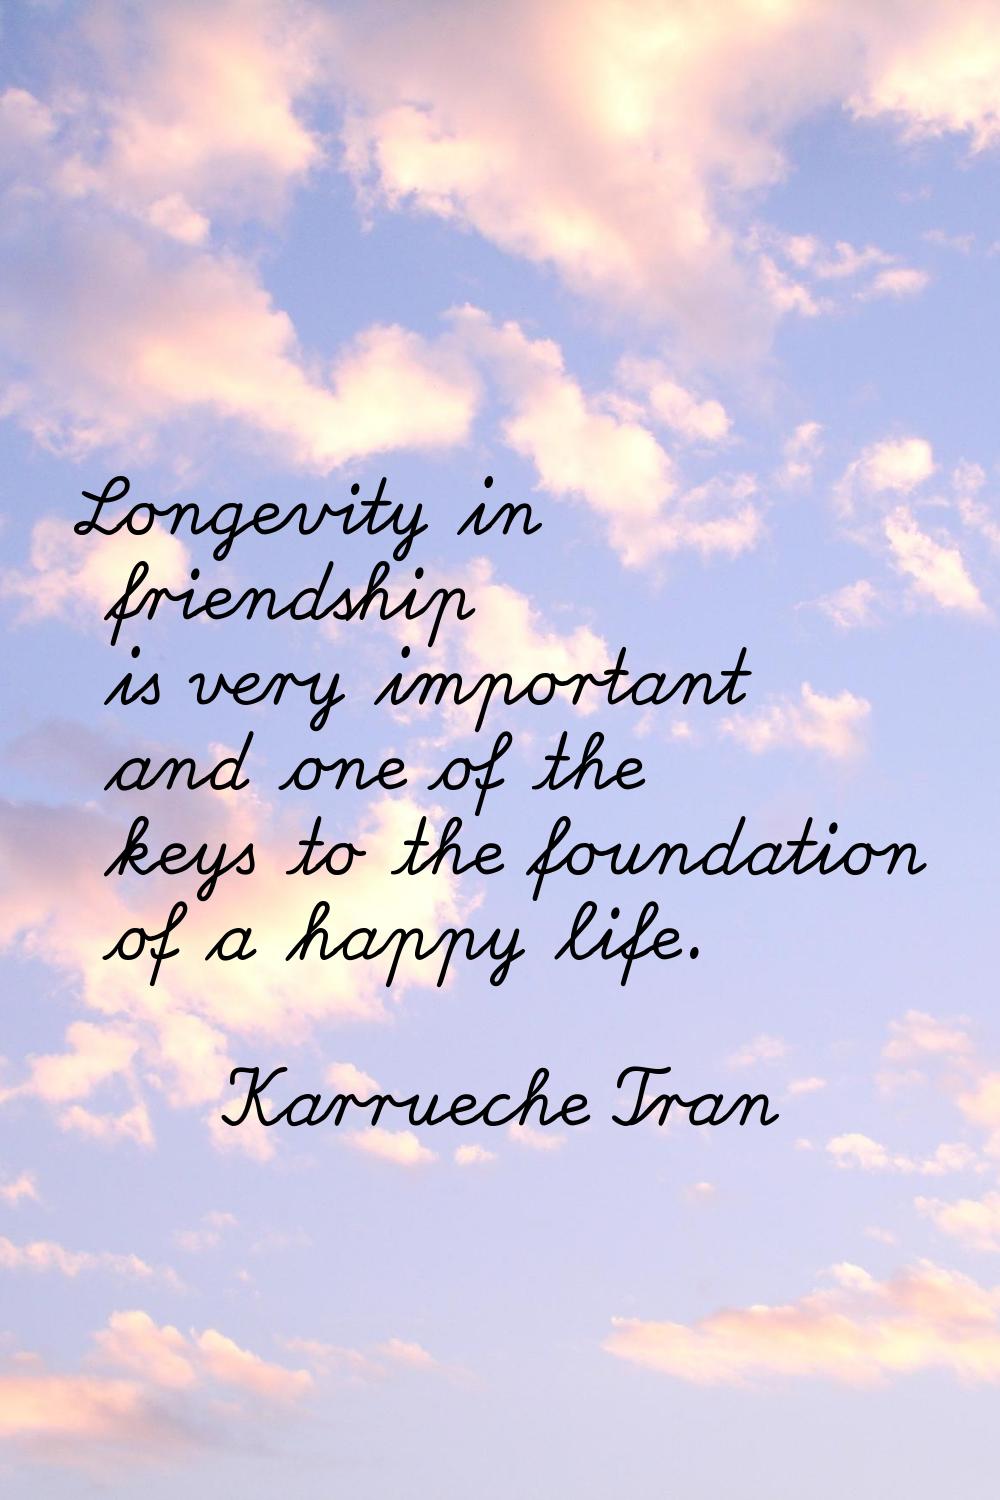 Longevity in friendship is very important and one of the keys to the foundation of a happy life.